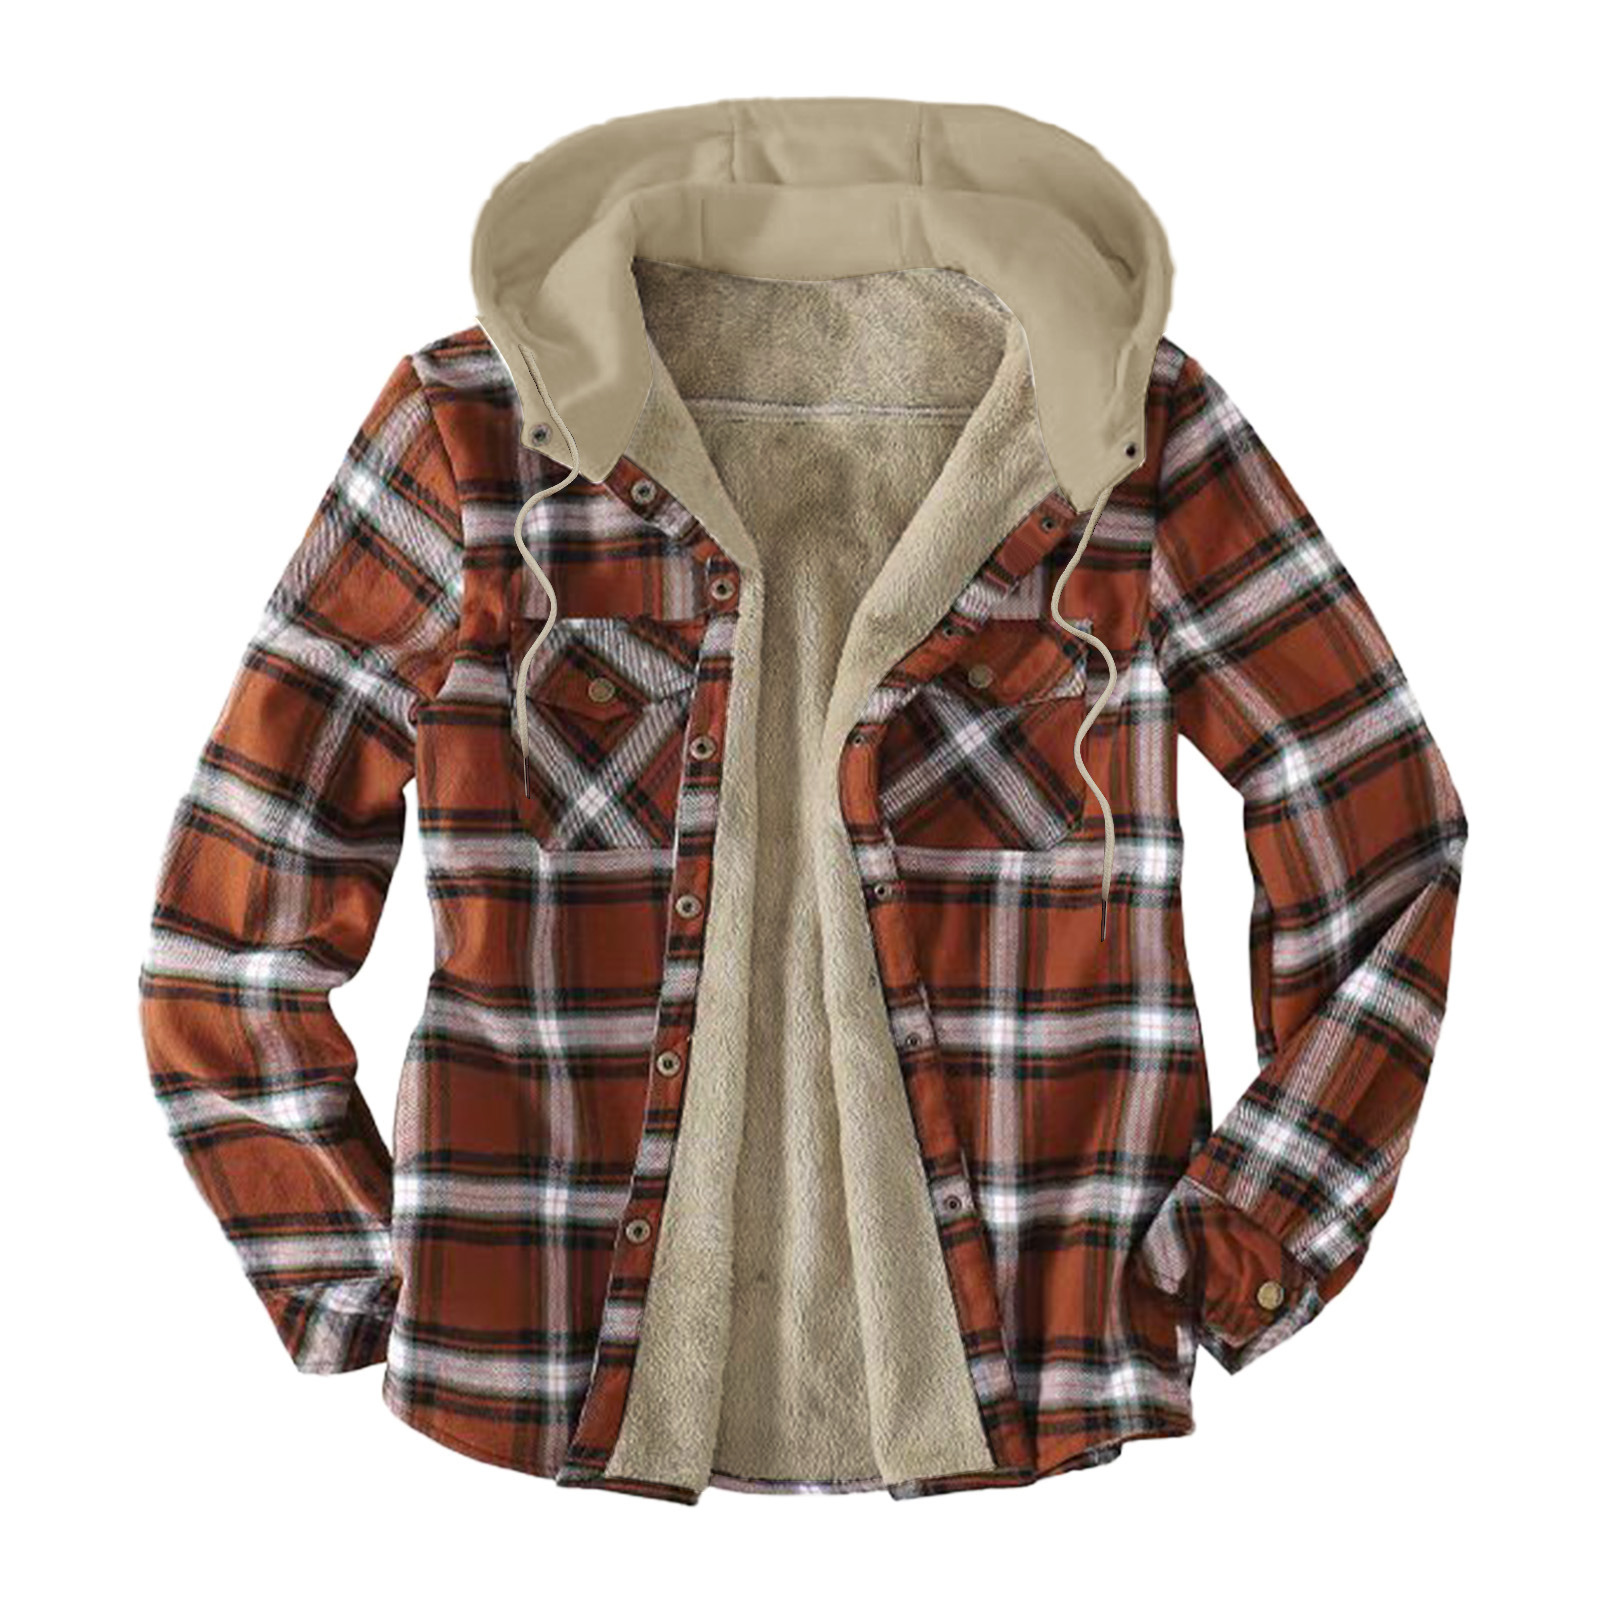 Men's Autumn And Winter Outdoor Plaid Hooded Jacket